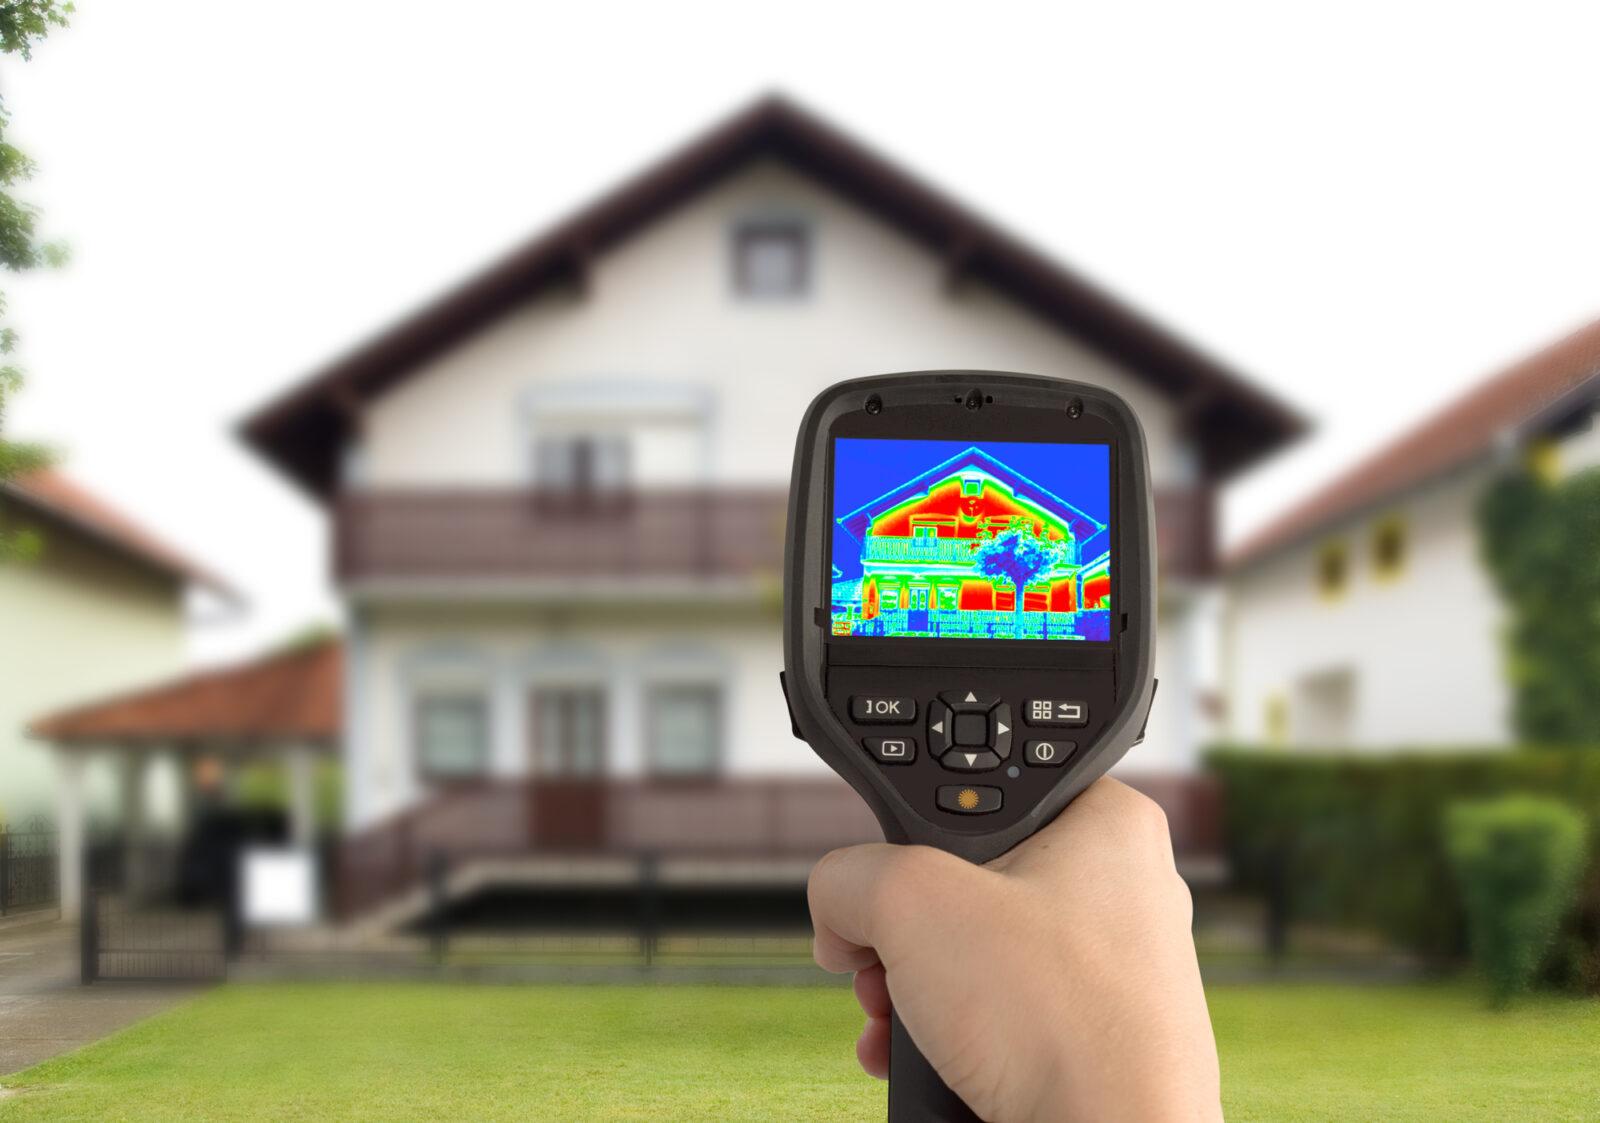 home infrared heat loss - thermal image of a home in massachusetts or rhode island